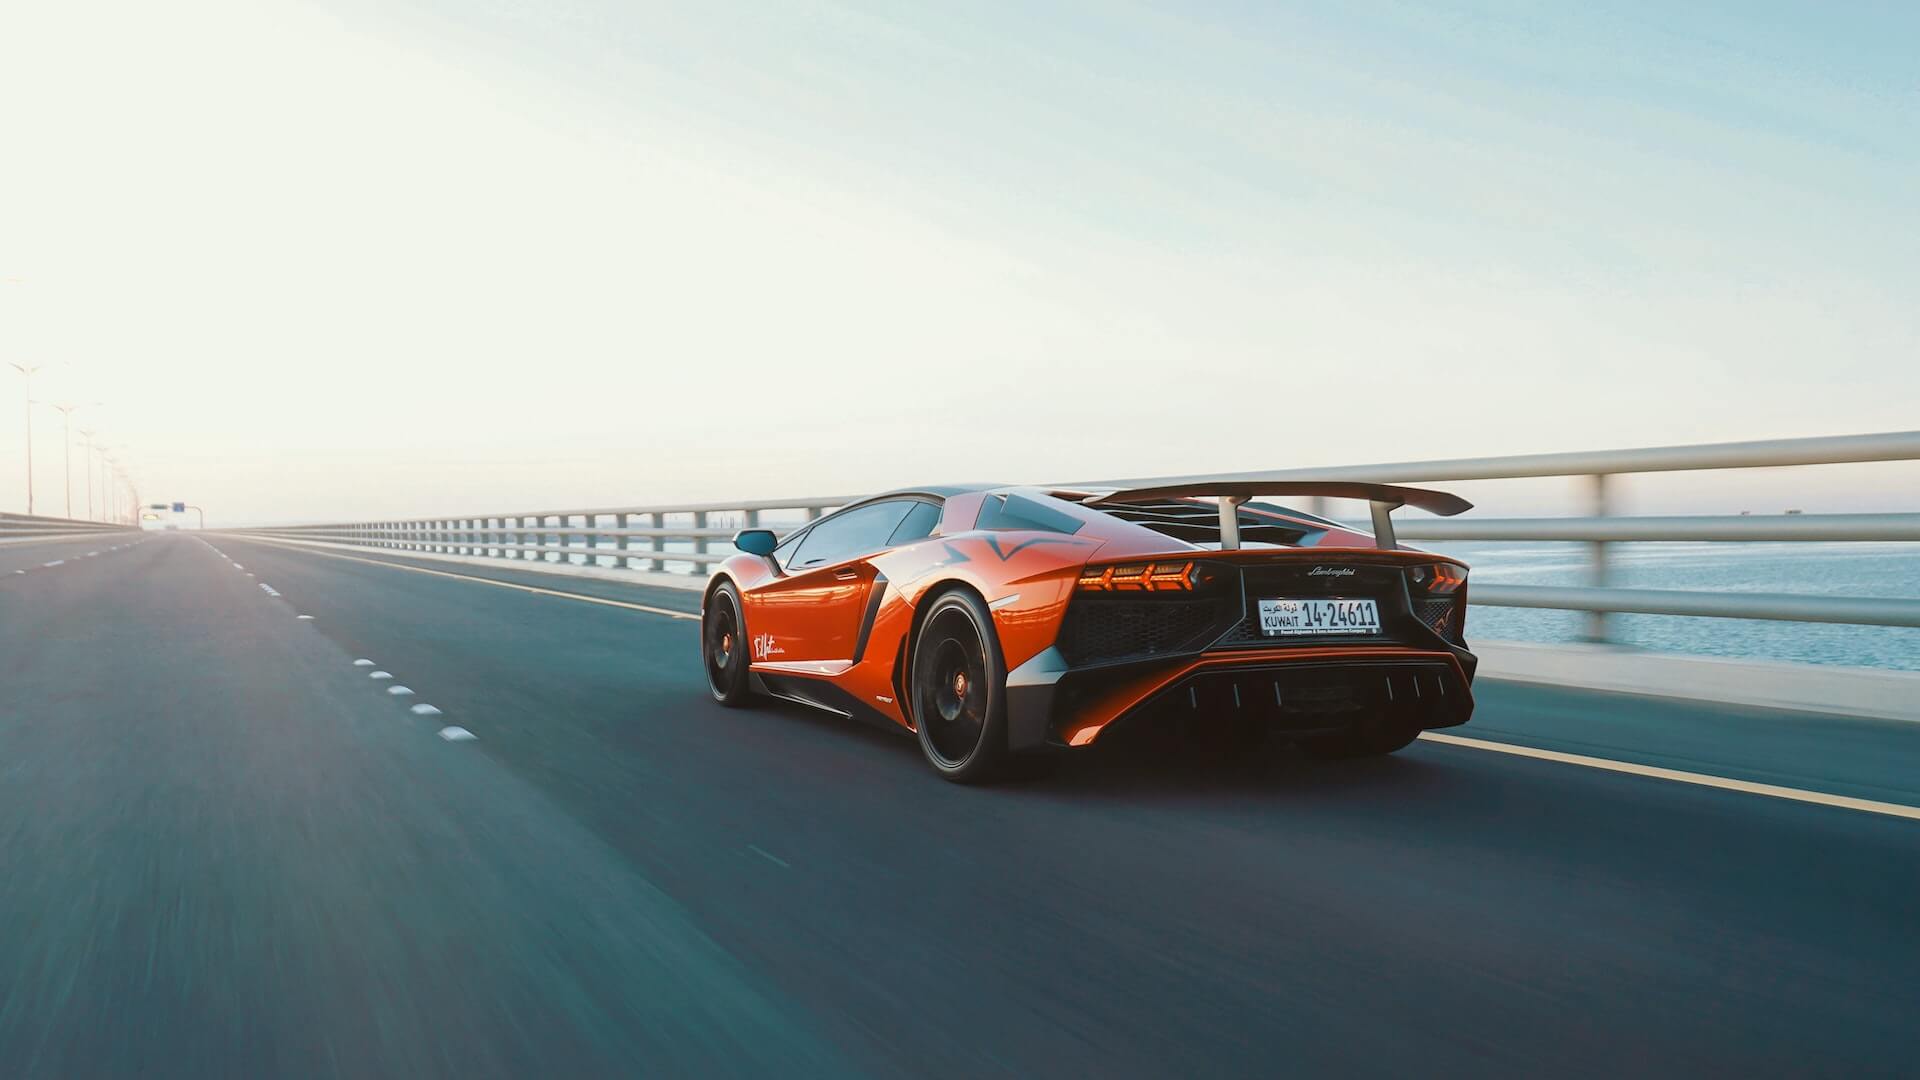 A Guide To Stunning Car Photography